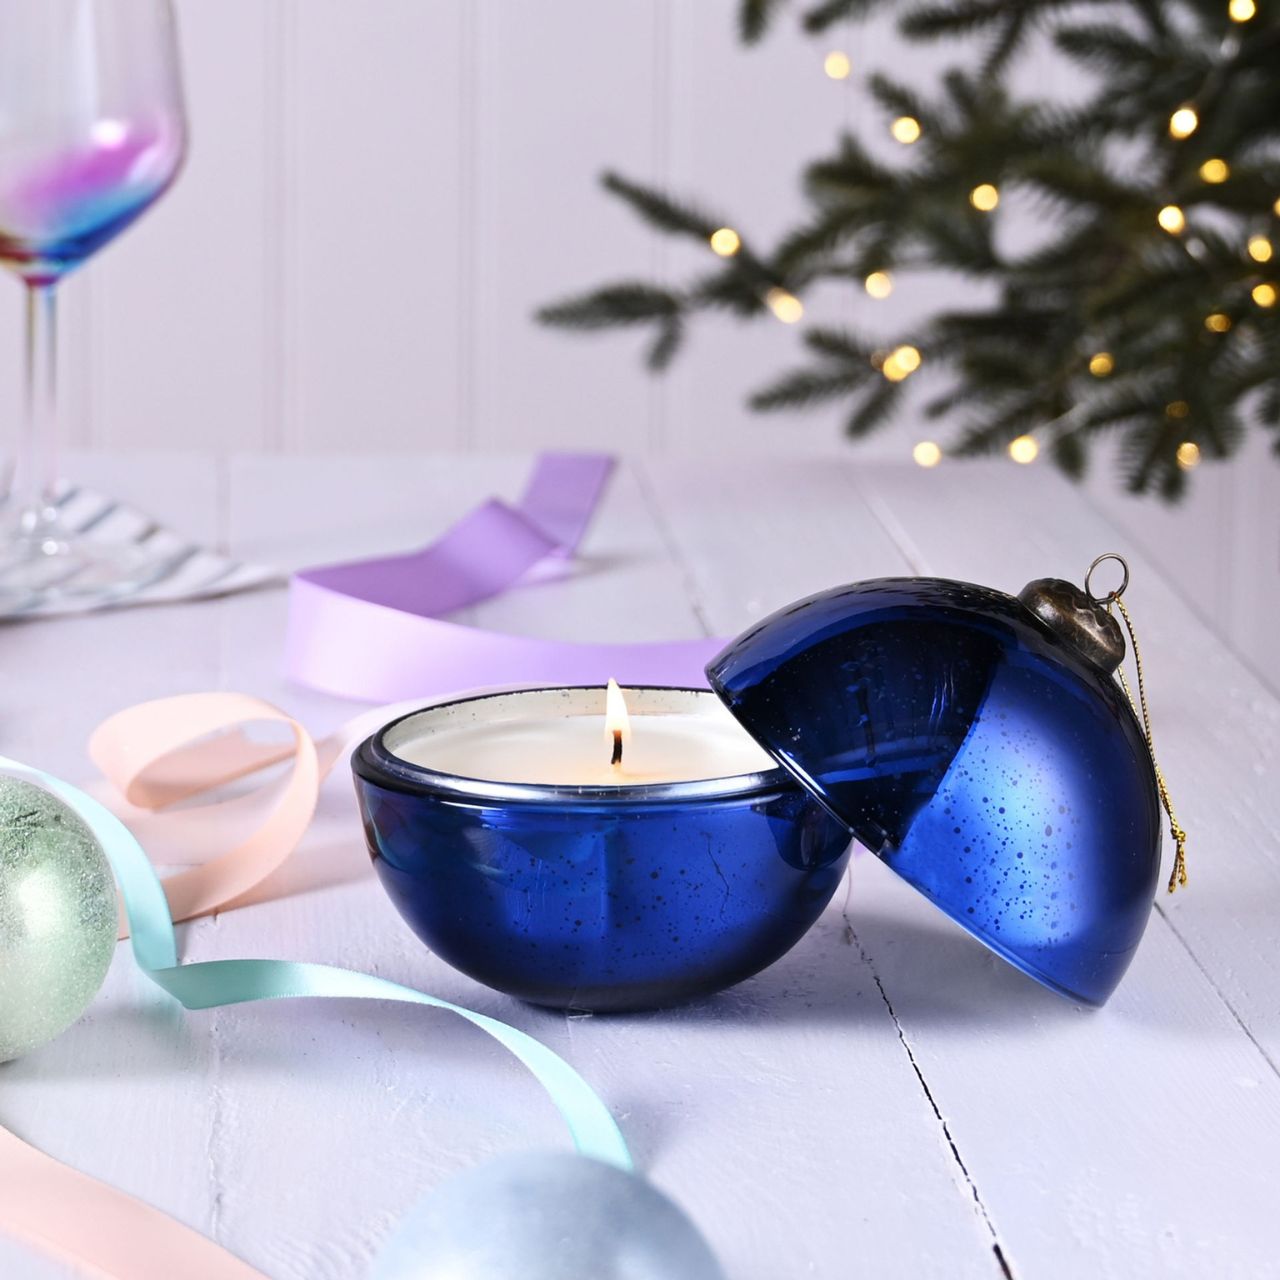 Blue Noel Fragranced Glass Christmas Bauble Candle  A Blue Noel fragranced glass bauble candle from THE SEASONAL GIFT CO.  This aromatic candle makes an eye-catching addition to homes during the festive season.